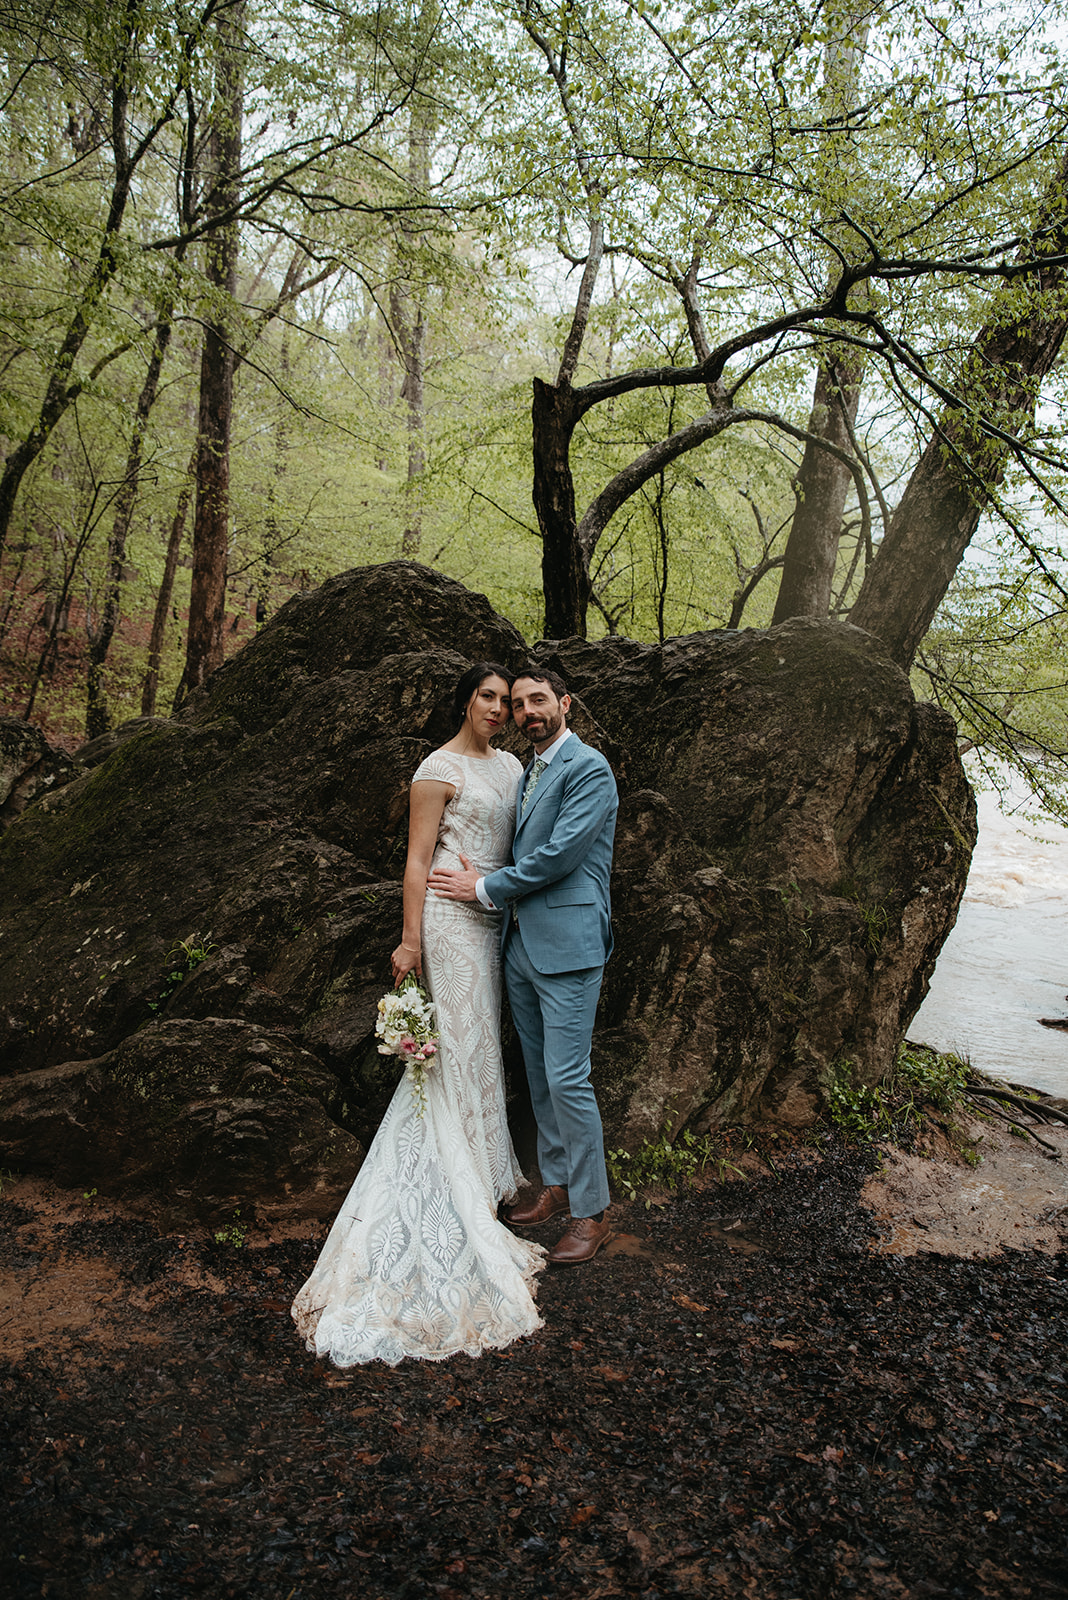 Eno River State Park Elopement in the Rain as a Durham Wedding Photographer 